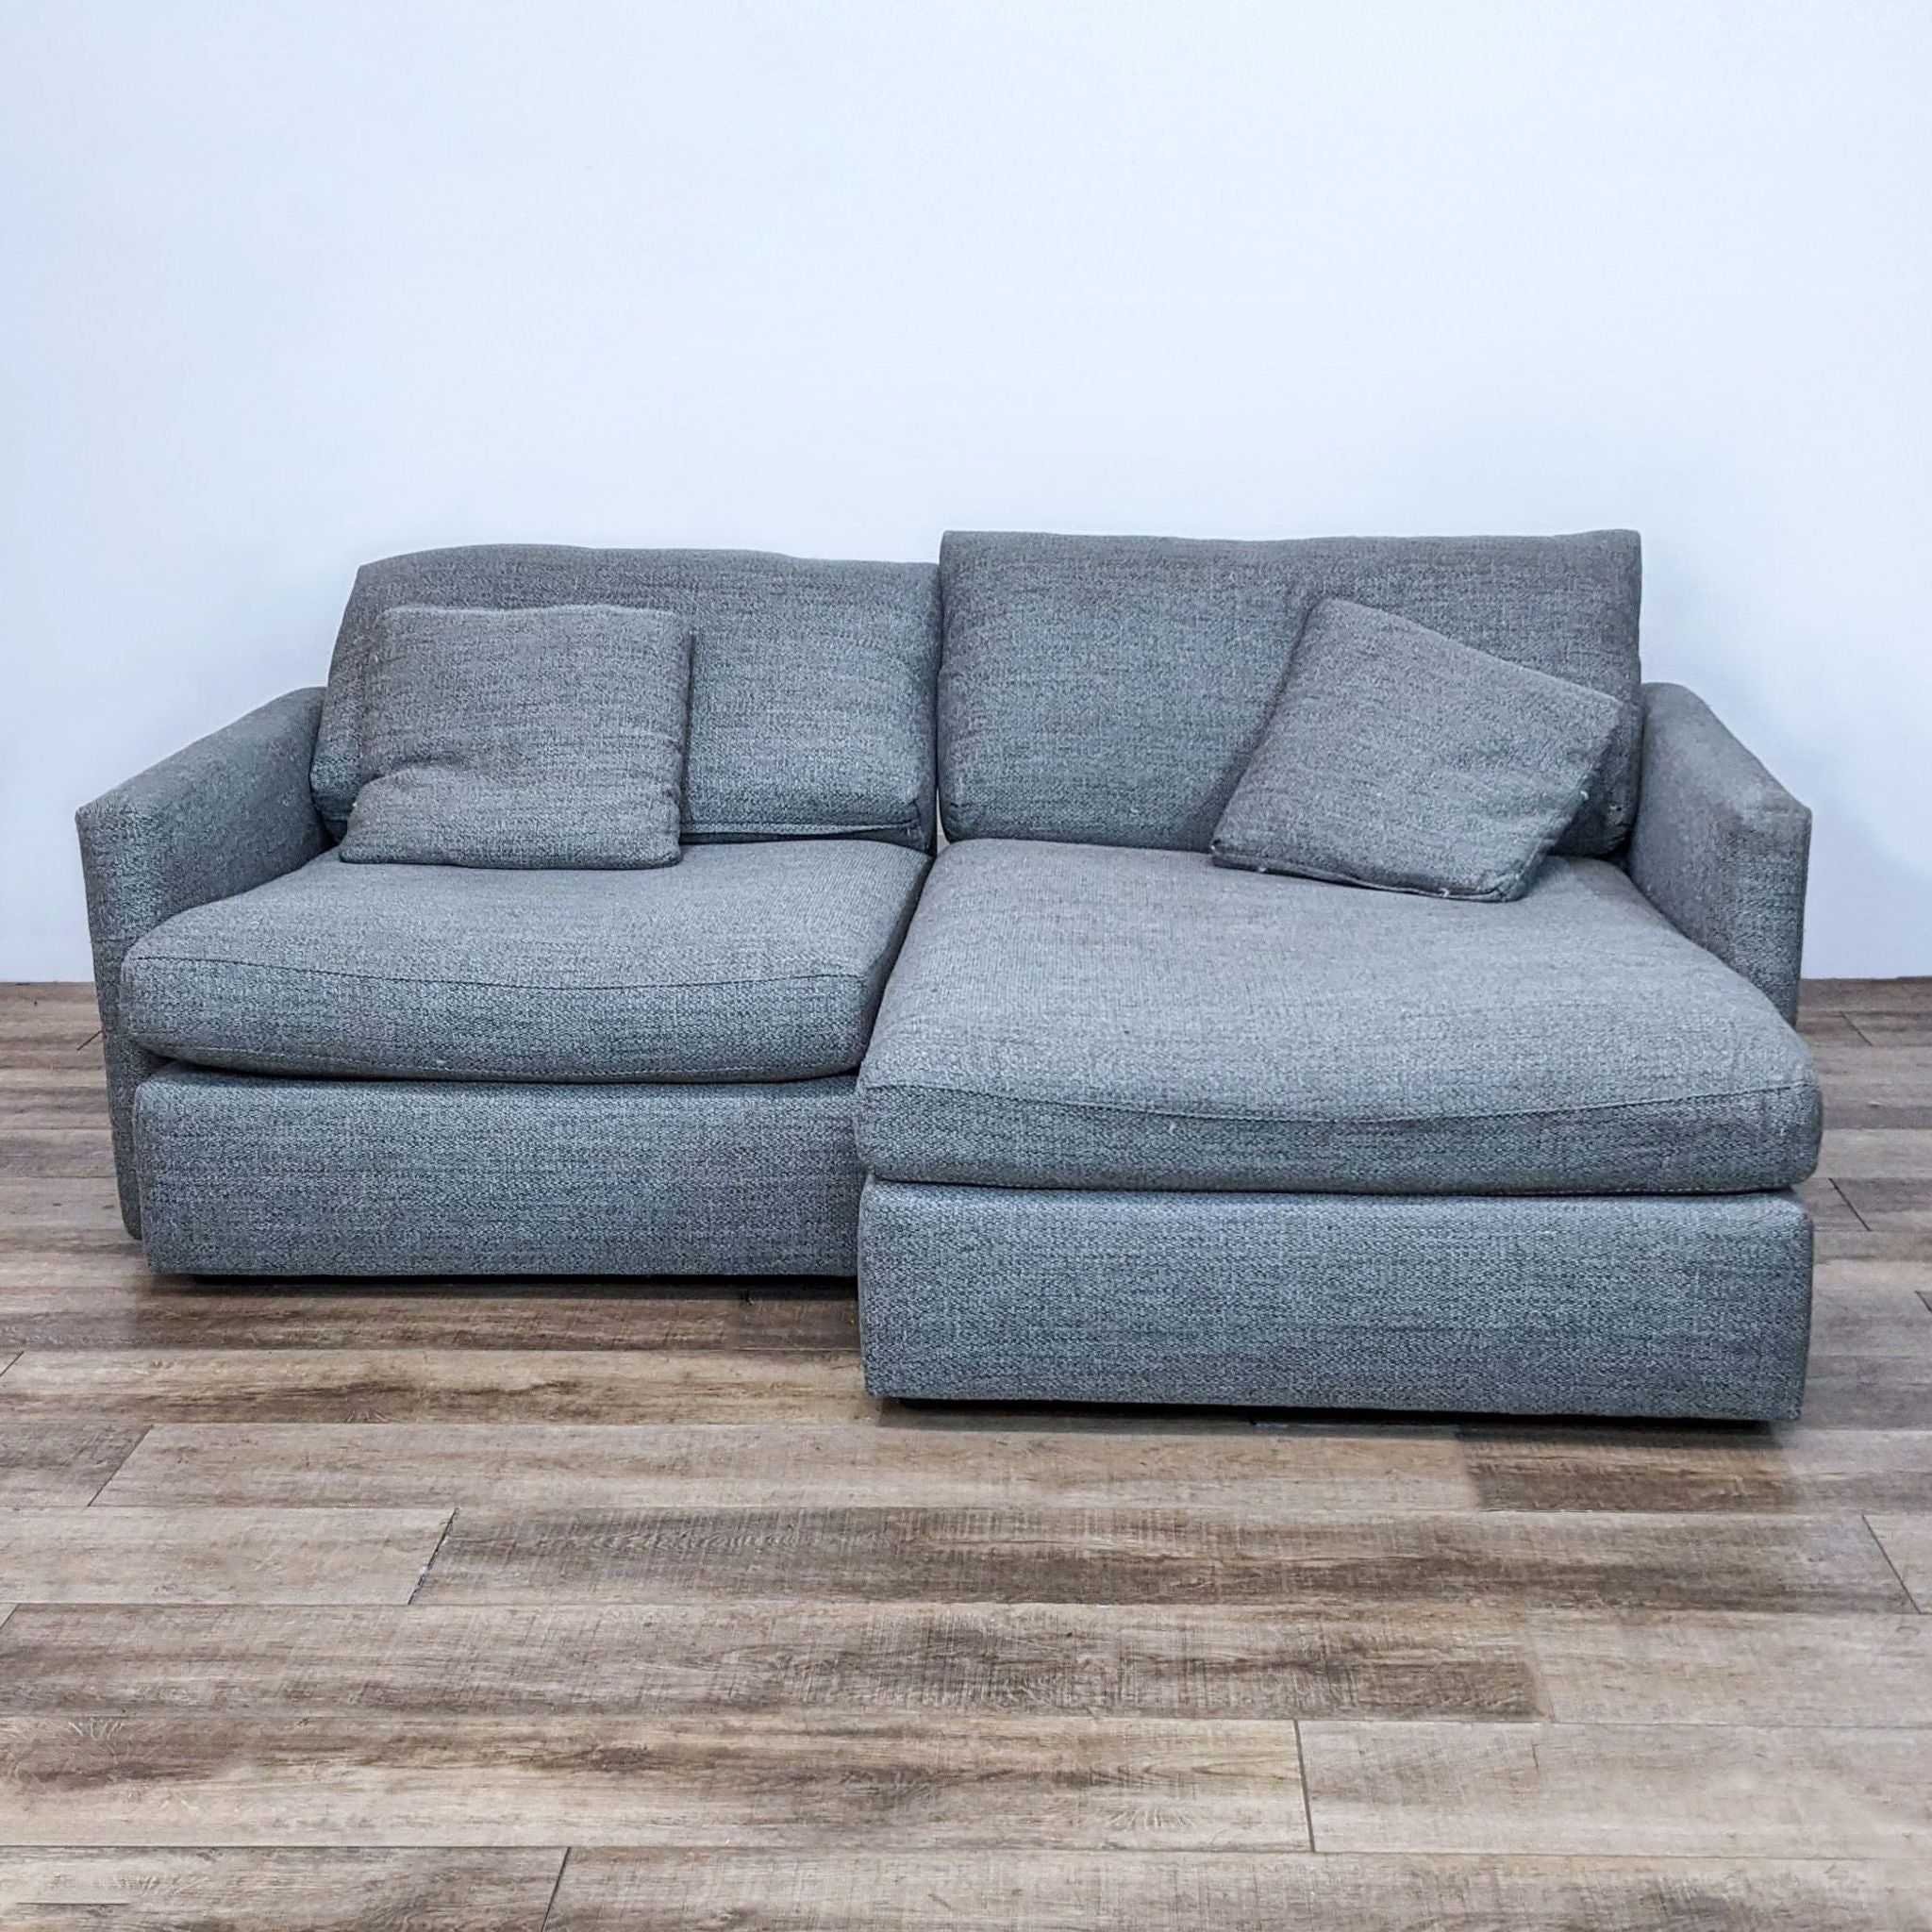 1. "Crate & Barrel modern two-piece sectional in a neutral gray fabric with narrow track arms and plush cushions, against a plain background."